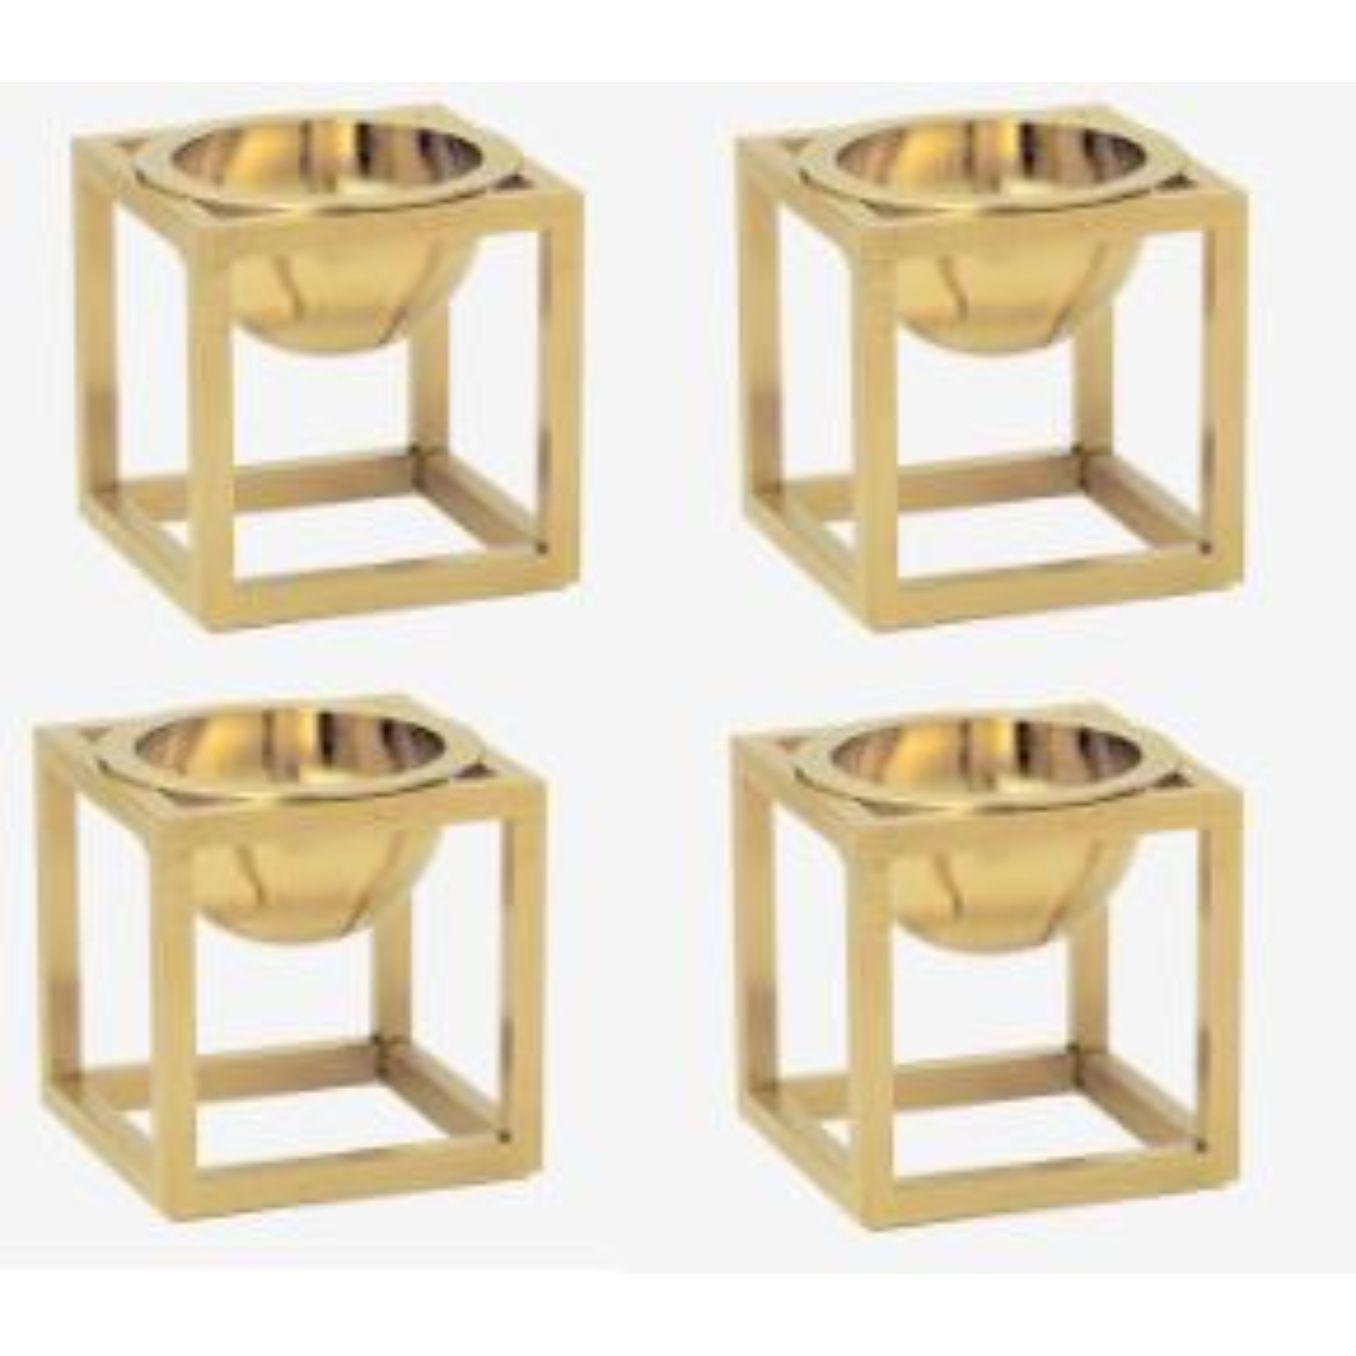 Set of 4 gold plated Mini Kubus bowls by Lassen
Dimensions: D 7 x W 7 x H 7 cm 
Materials: Metal 
Weight: 0.40 Kg

Kubus bowl is based on original sketches by Mogens Lassen, and contains elements from Bauhaus, which Mogens Lassen took